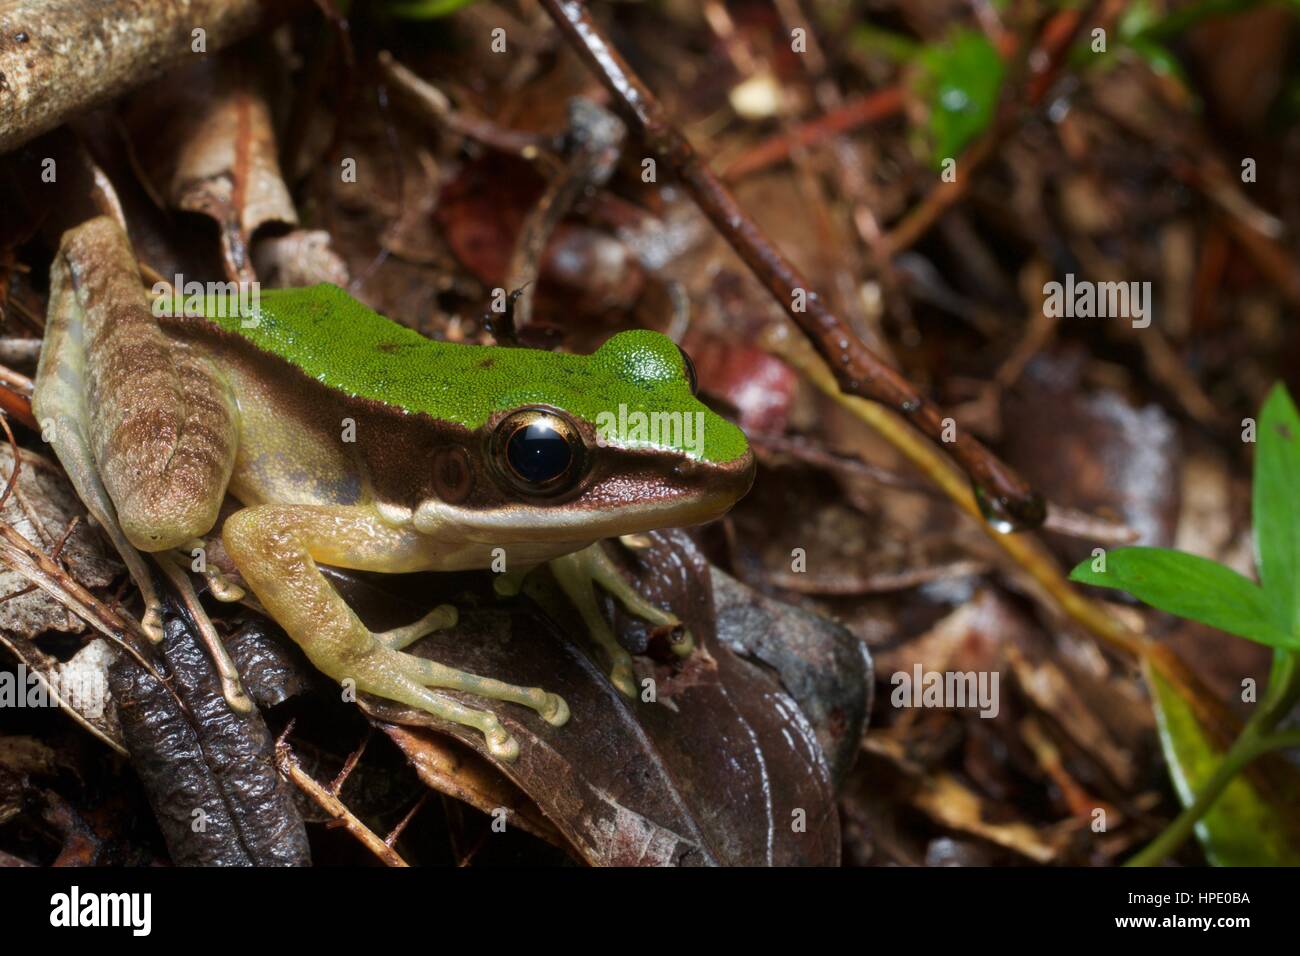 A Poisonous Rock Frog (Odorrana hosii) in leaf litter in the rainforest at Fraser's Hill, Pahang, Malaysia Stock Photo